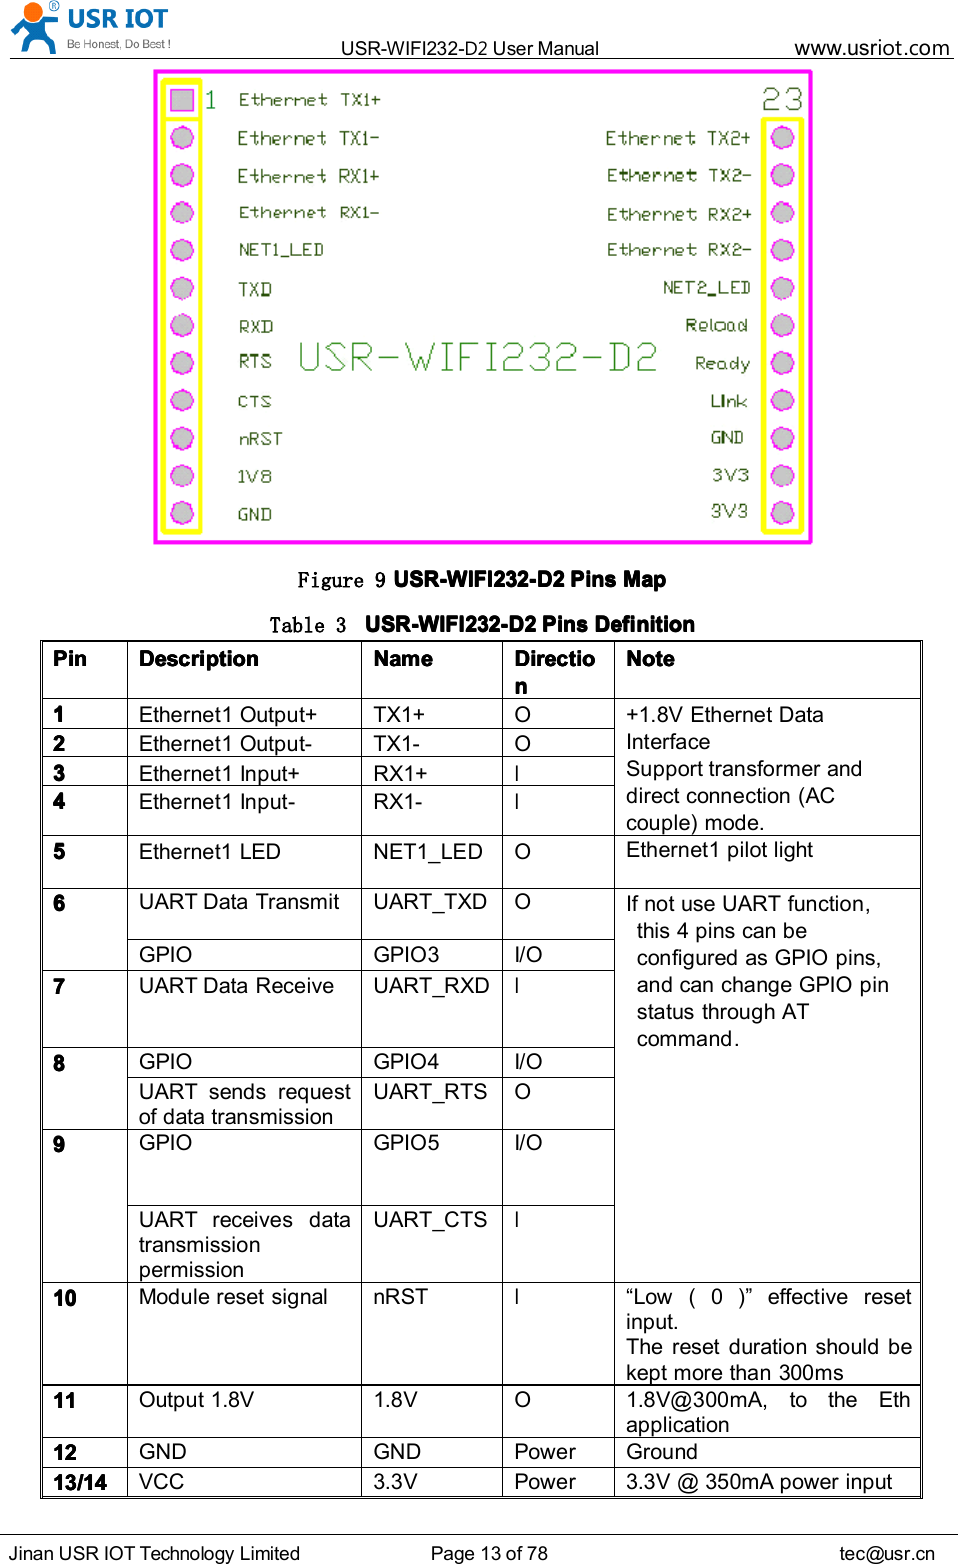 USR-WIFI232- D2 User Manual www.usr iot .comJinan USR IOT Technology Limited Page 13 of 78 tec@usr.cnFigure 9 USR-WIFI232-USR-WIFI232-USR-WIFI232-USR-WIFI232- D2D2D2D2 PinsPinsPinsPins MapMapMapMapTable 3 USR-WIFI232-USR-WIFI232-USR-WIFI232-USR-WIFI232- D2D2D2D2 PinsPinsPinsPins DefinitionDefinitionDefinitionDefinitionPinPinPinPin DescriptionDescriptionDescriptionDescription NameNameNameName DirectiDirectiDirectiDirecti oooonnnnNoteNoteNoteNote1111Ethernet 1 Output+ TX1+ O +1.8V Ethernet DataInterfaceSupport transformer anddirect connection (ACcouple) mode.2222Ethernet 1 Output - TX1- O3333Ethernet 1 Input+ RX1+I4444Ethernet 1 Input - RX1-I5555Ethernet1 LED NET1_LED OEthernet1 pilot light6666UART Data Transmit UART_TXD OIf not use UART function ,this 4 pins can beconfigured as GPIO pins,and can change GPIO pinstatus through ATcommand .GPIO GPIO 3 I/O7777UART Data Receive UART_RXDI8888GPIO GPIO 4 I/OUART sends requestof data transmissionUART_RTS O9999GPIO GPIO 5 I/OUART receives datatransmissionpermissionUART_CTSI10101010Module reset signal nRSTI“ Low ( 0 ) ” effective resetinput.The reset duration should bekept more than 300ms11111111Output 1.8V 1.8V O 1.8V@300mA, to the Ethapplication12121212GND GND Power Ground13131313 /14/14/14/14VCC 3.3V Power 3.3V @ 350mA power input